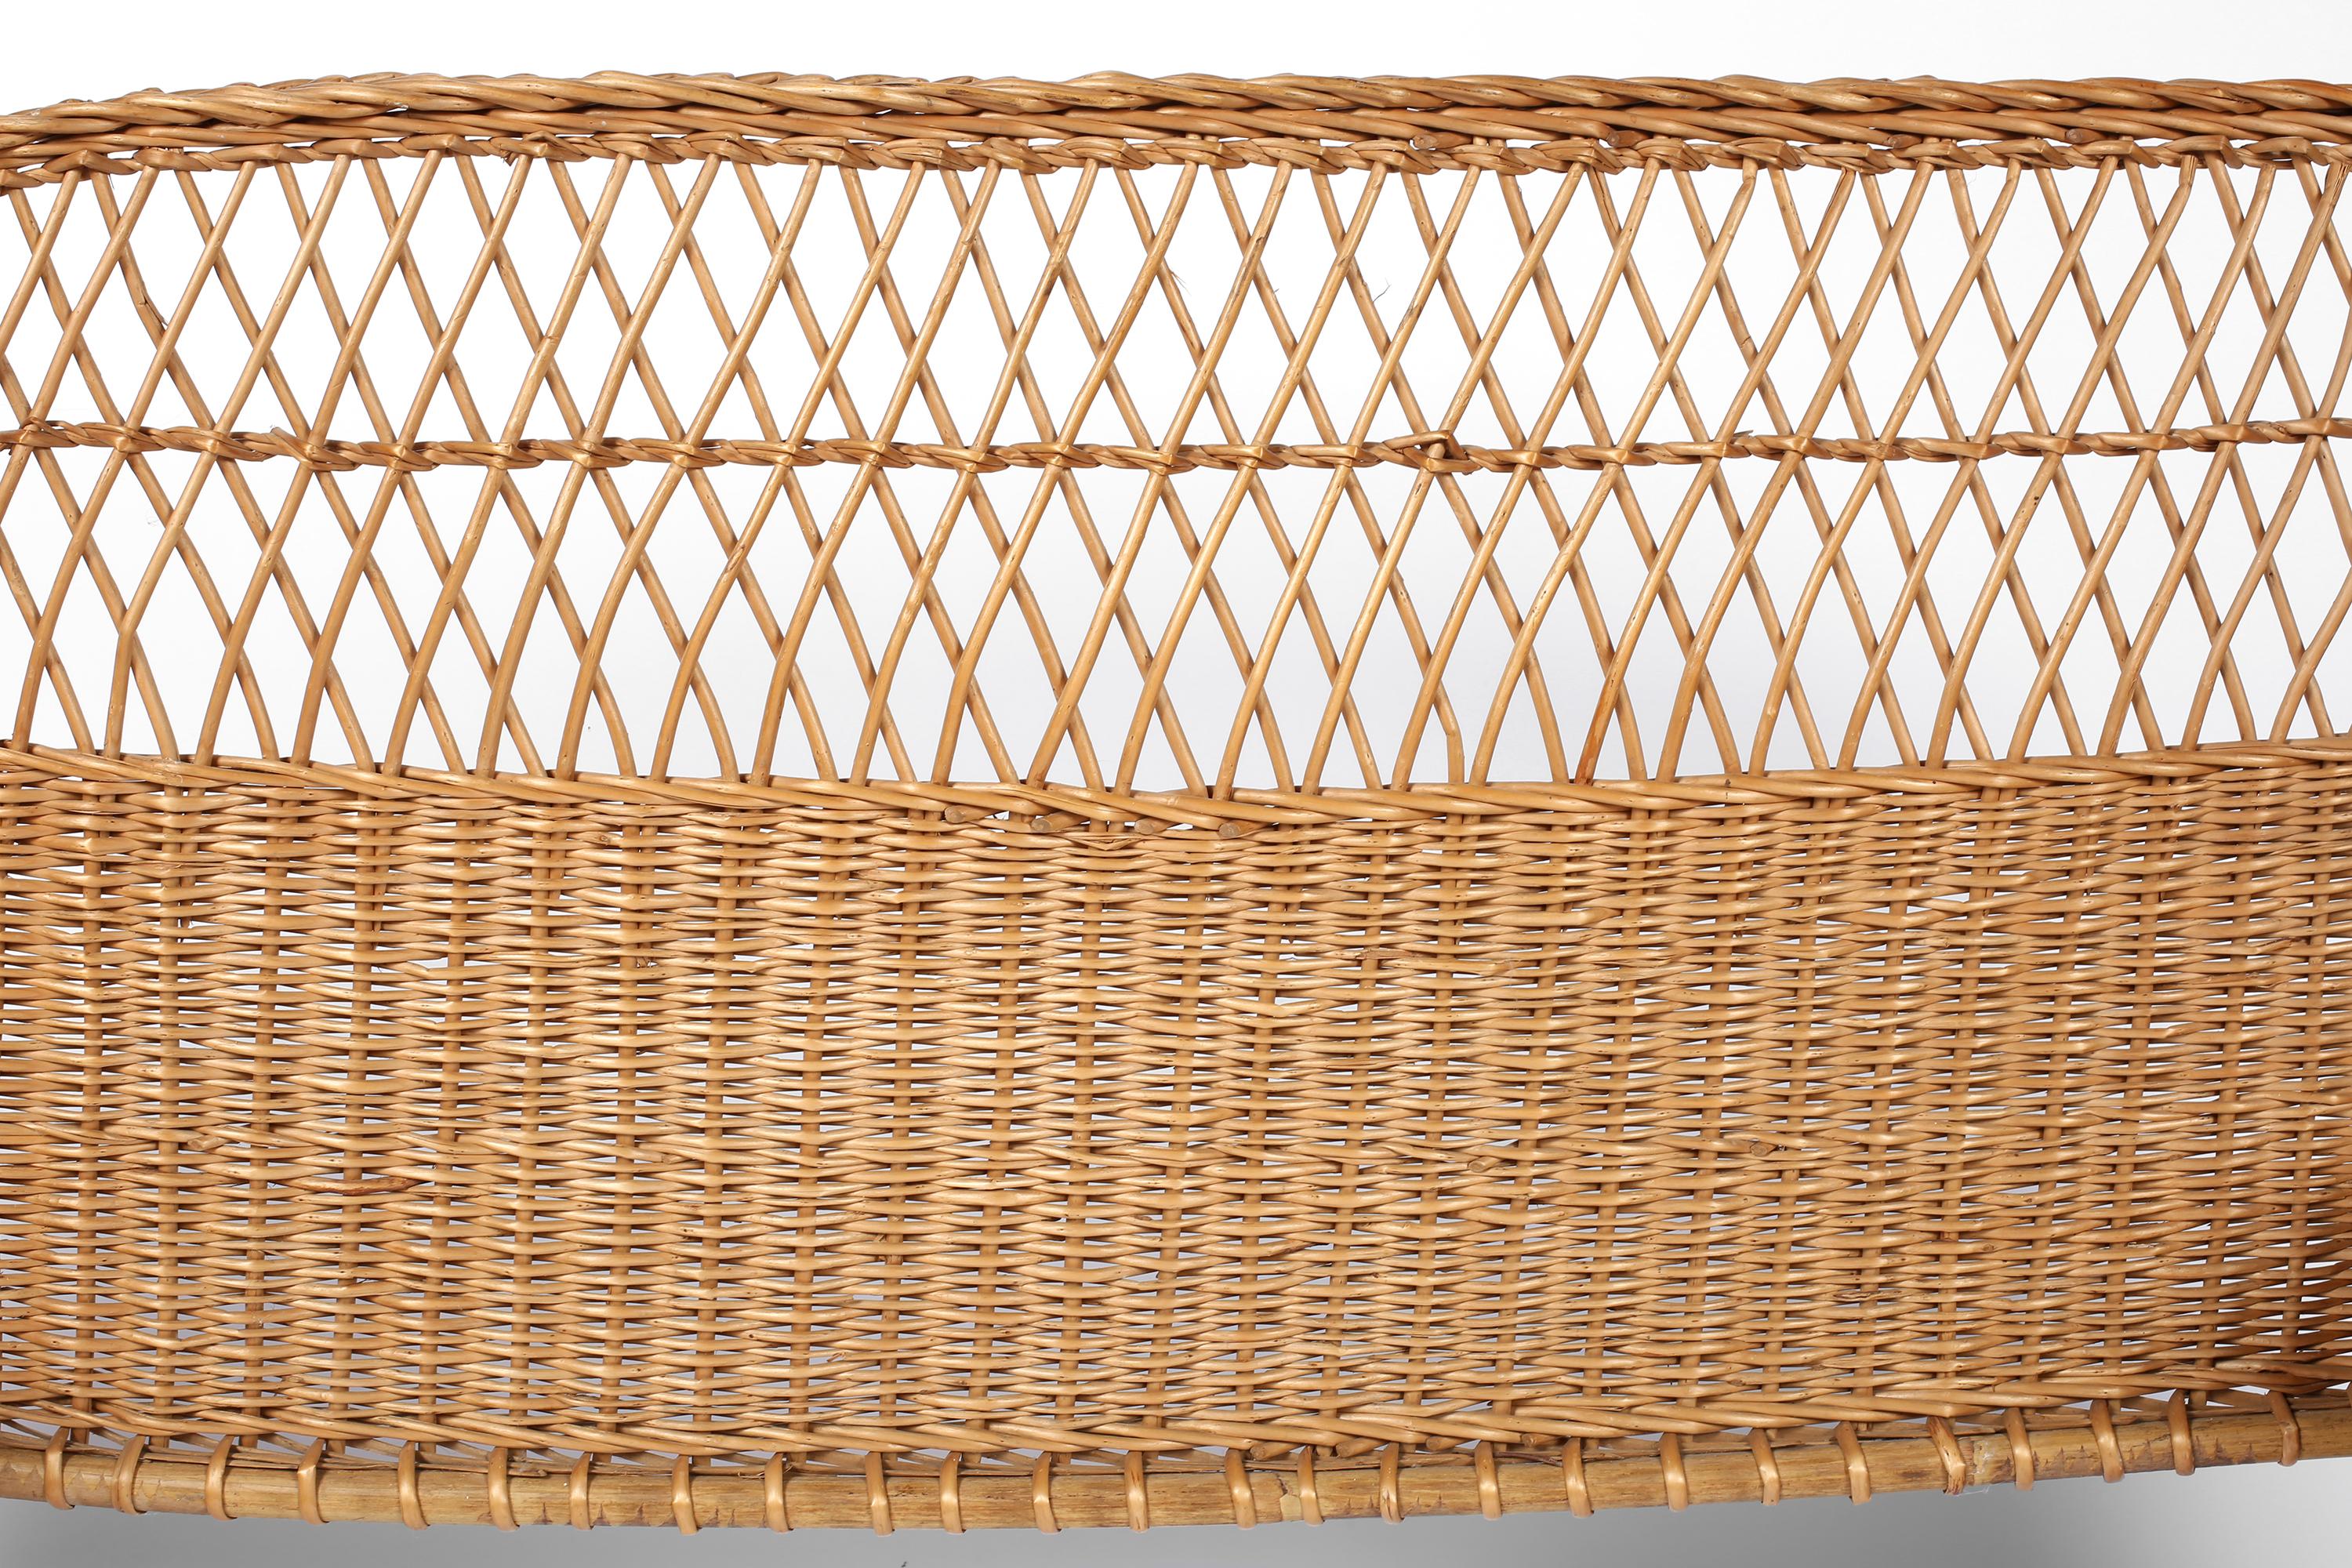 French Provincial 1960s Woven Wicker Single Headboard Rattan Midcentury Rustic Provence For Sale